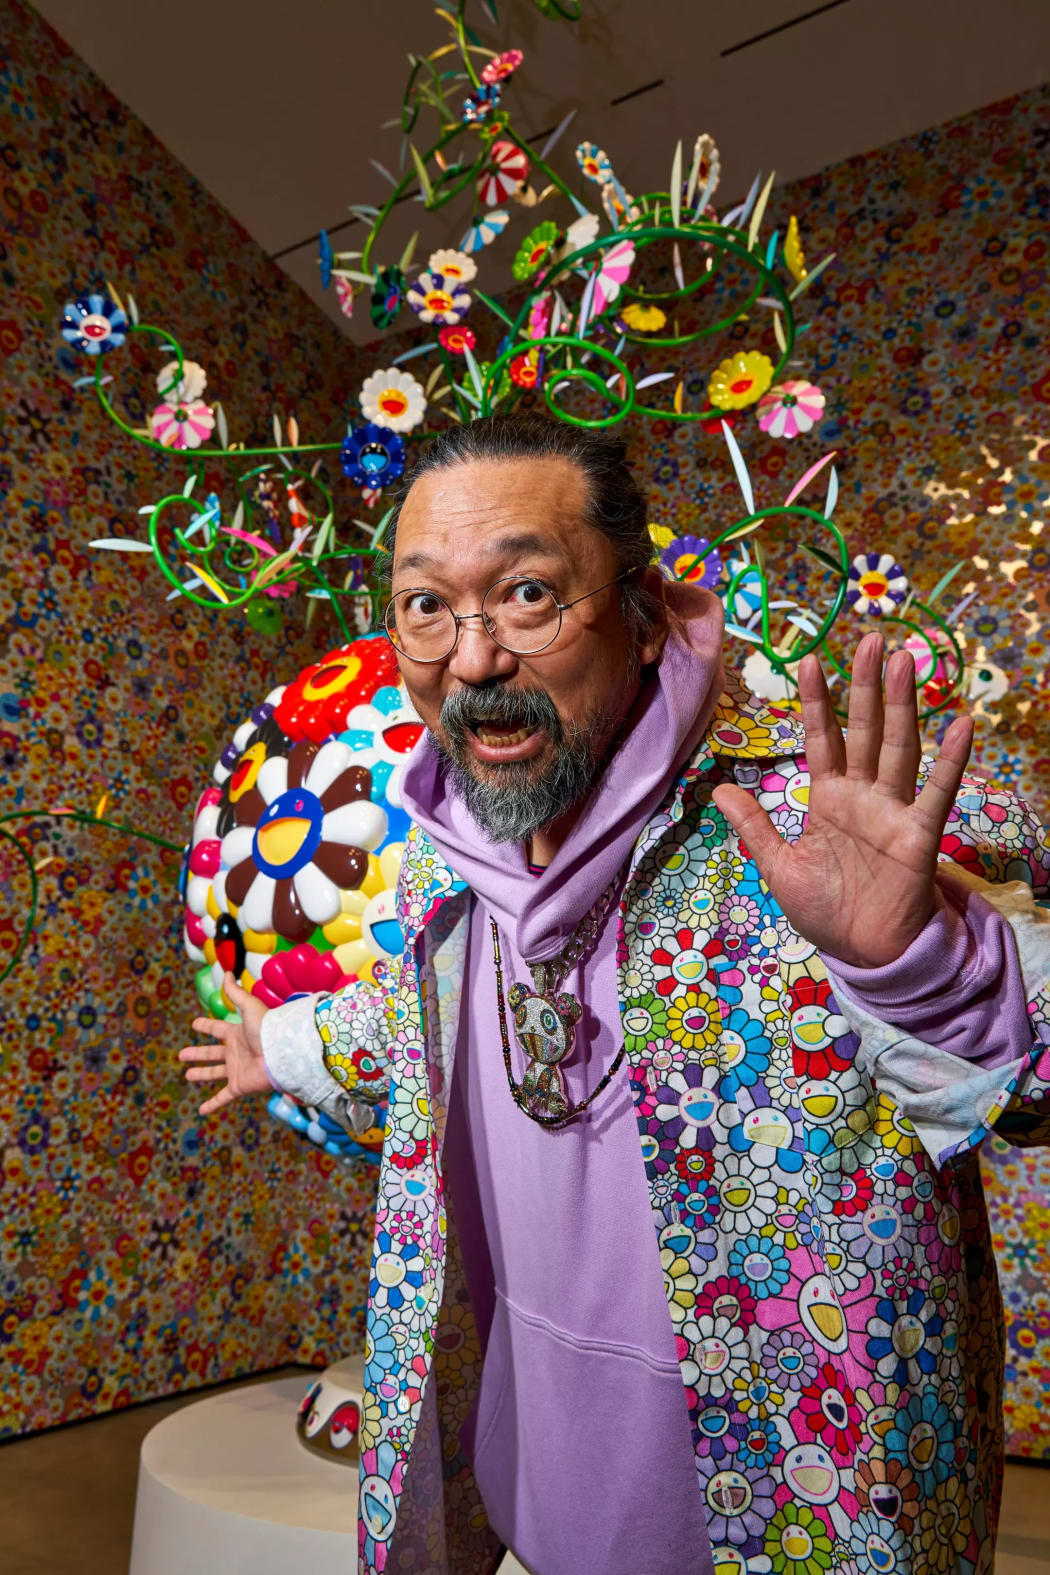 Takashi Murakami: From Cartoons to Capitalism, Influences from Star Wars, Natural Disasters, and the Pandemic